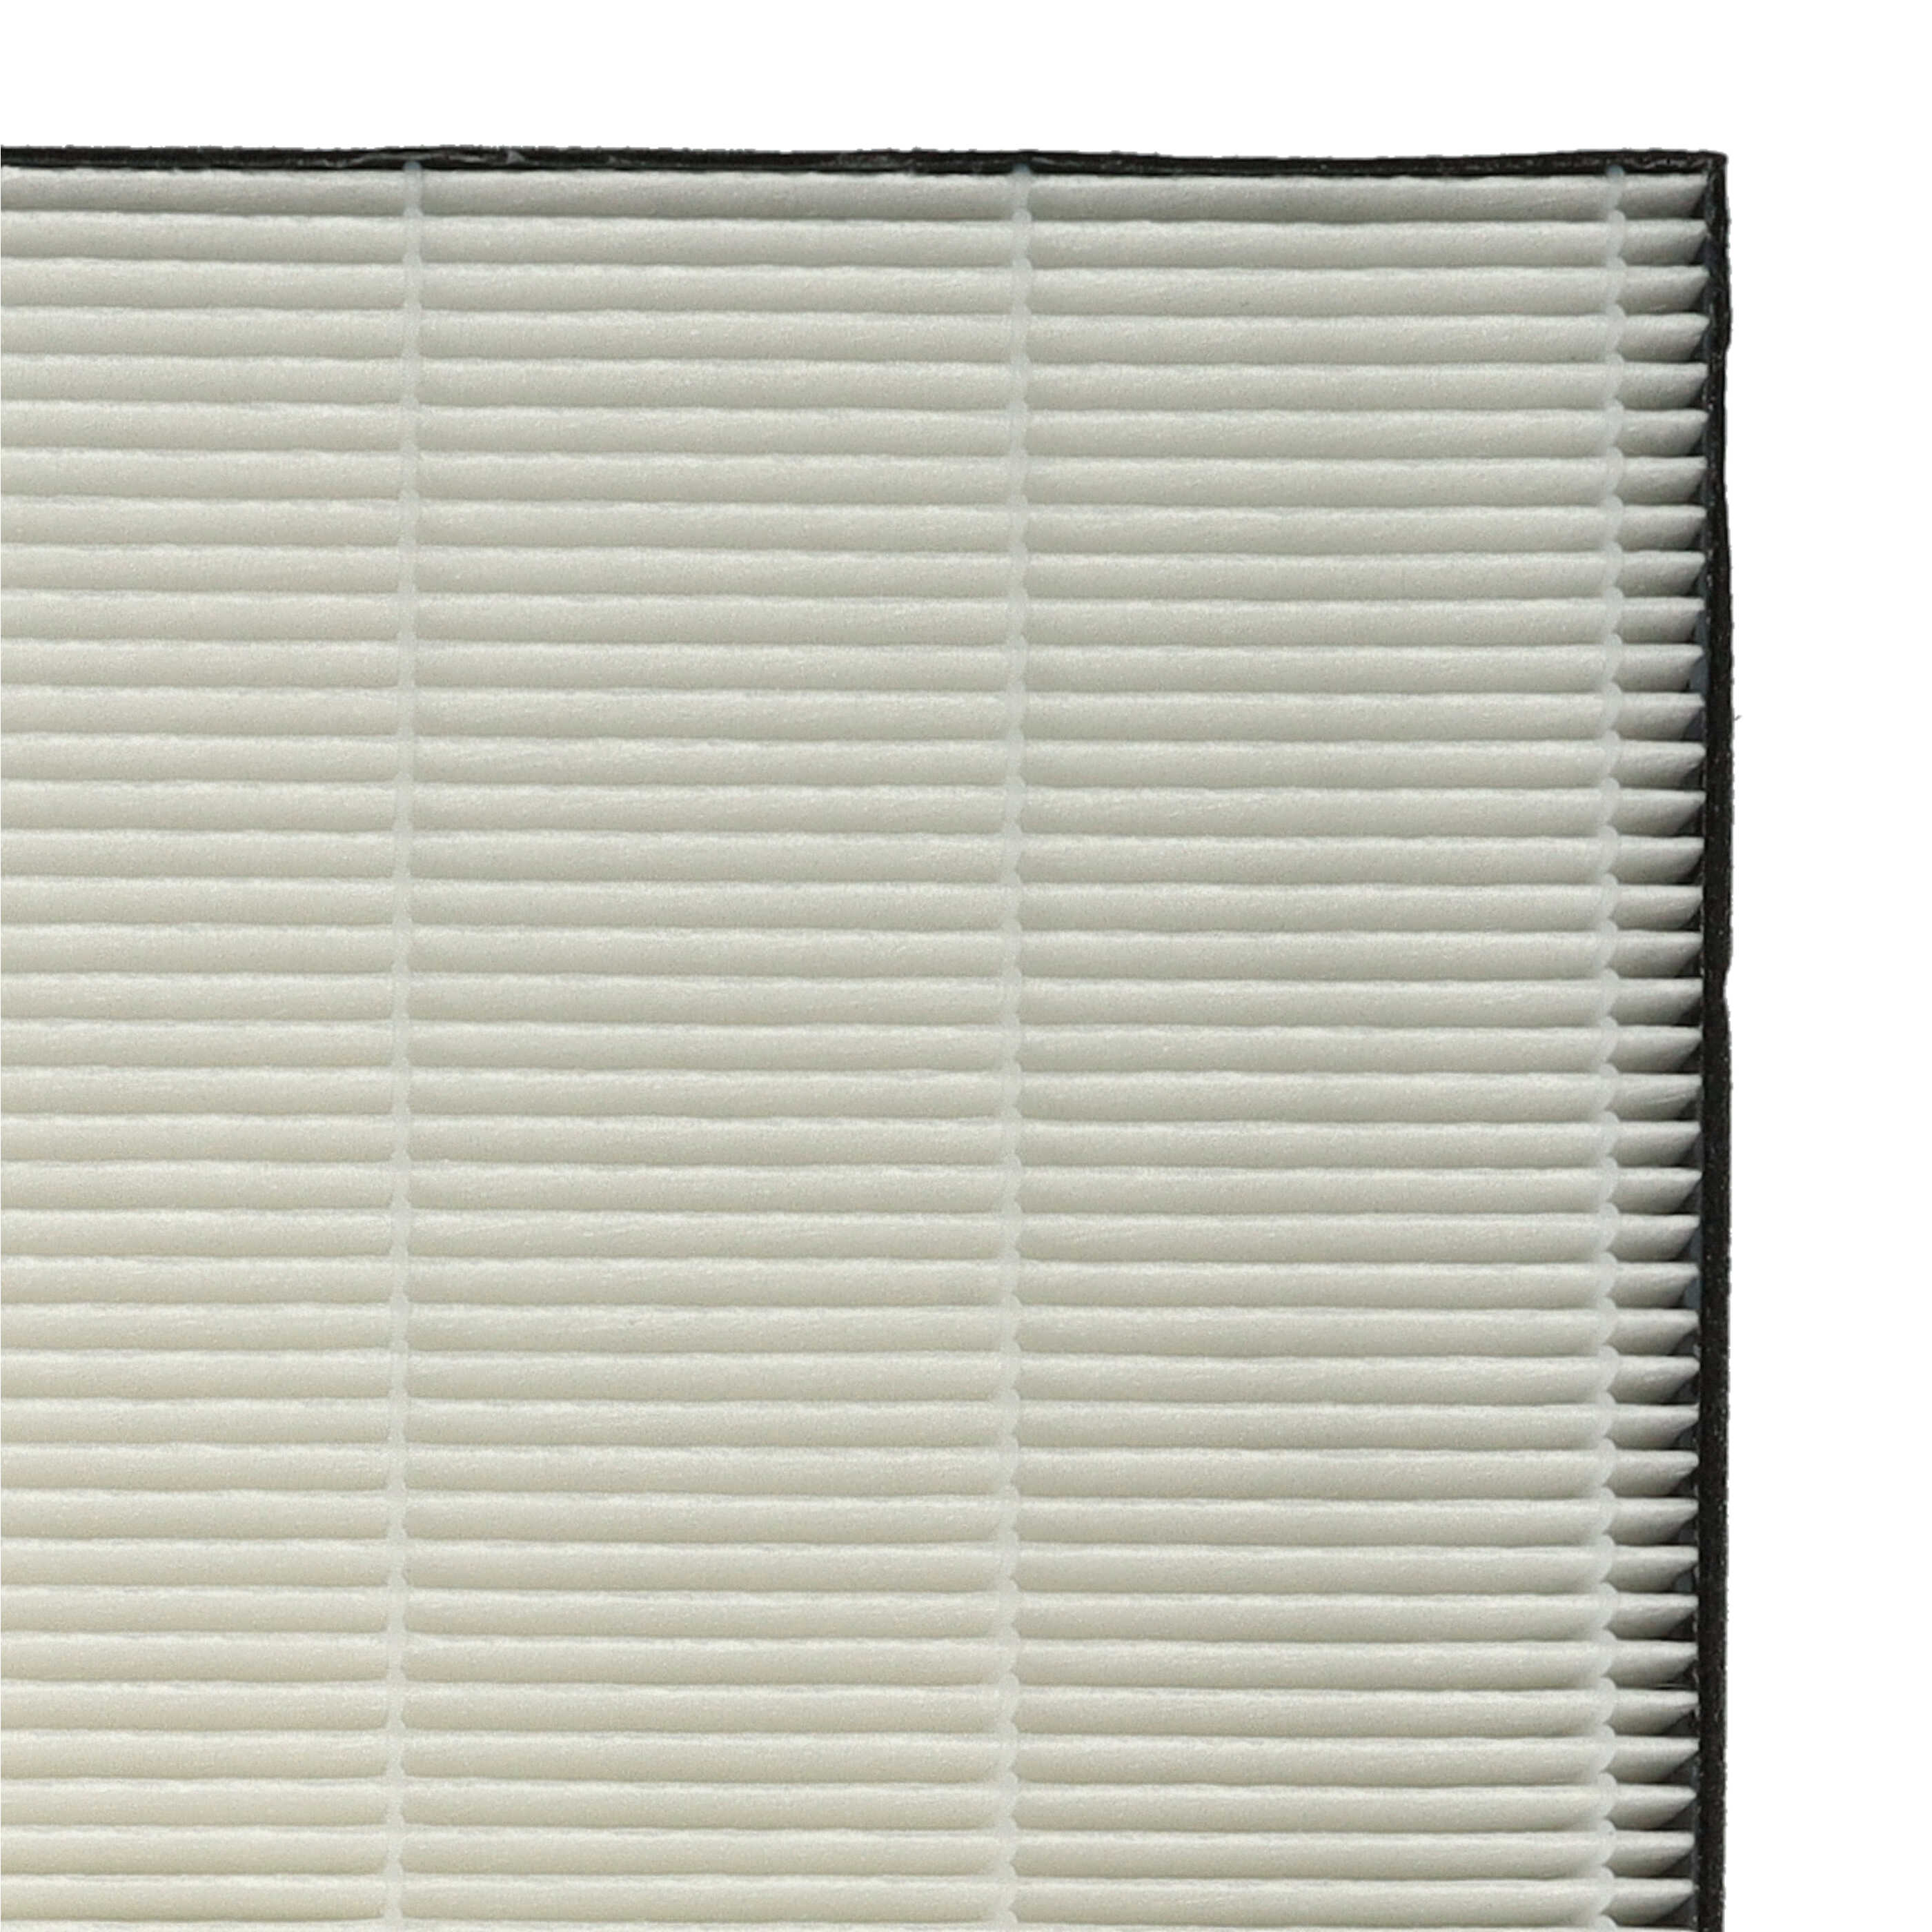 vhbw HEPA Filter Replacement for Philips FY2422/30 for Air Cleaner - Spare Air Filter